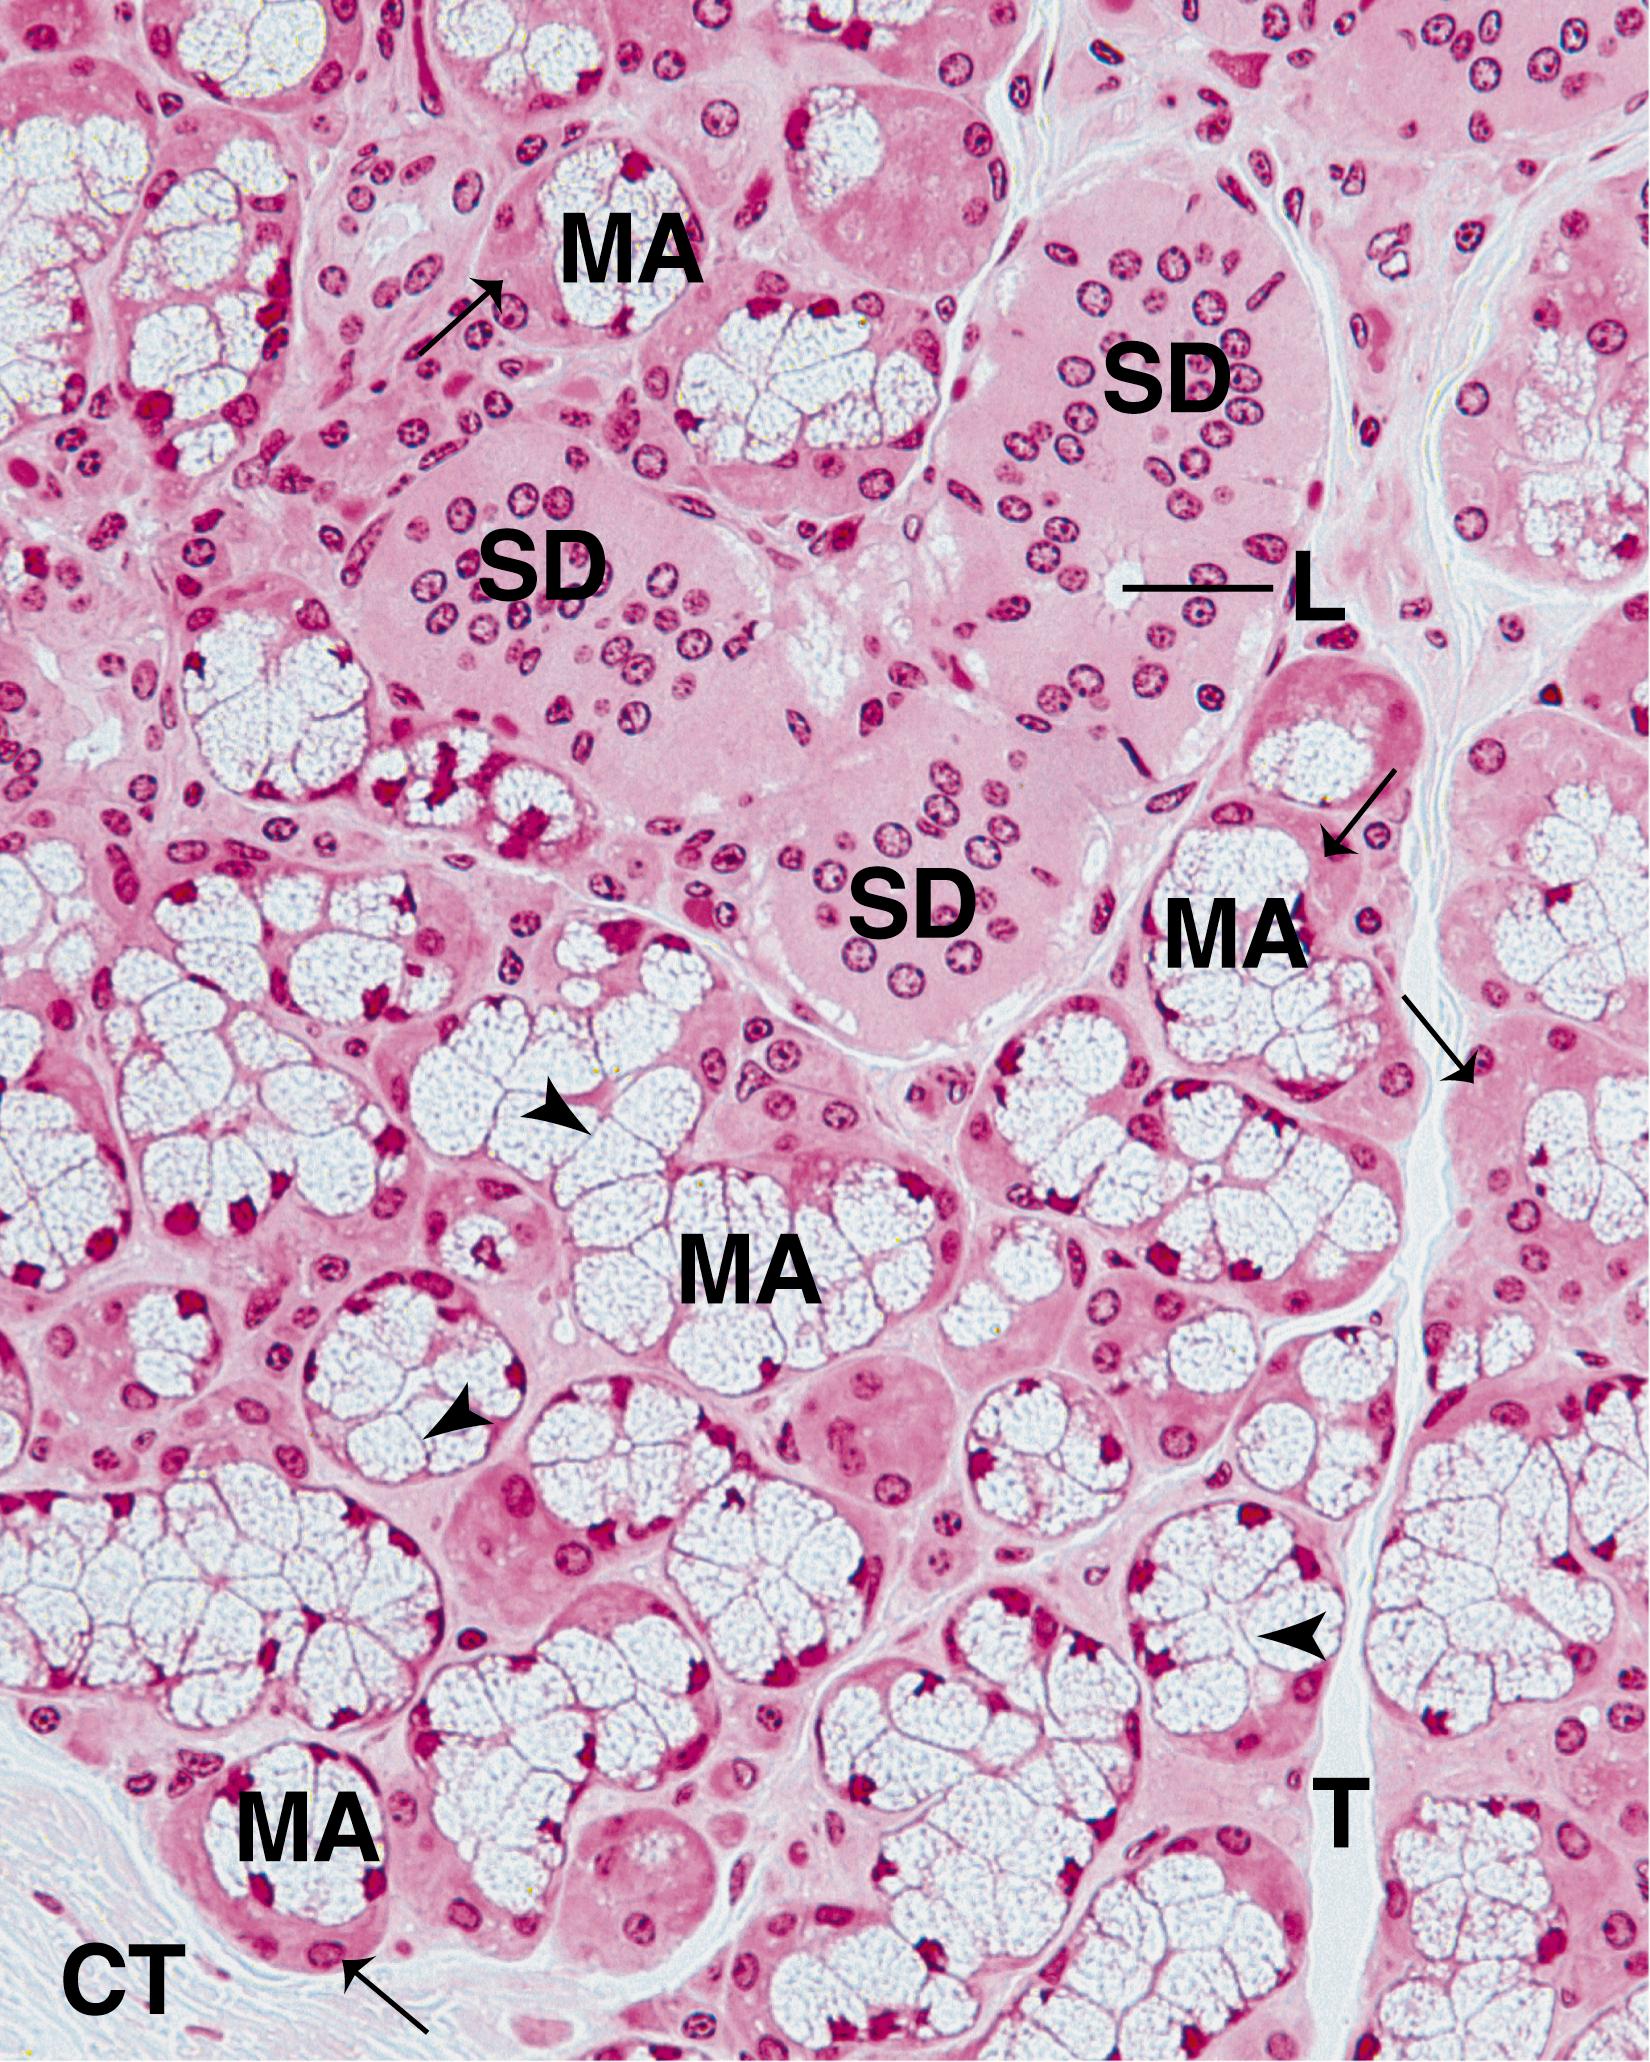 Fig. 18.7, This medium-magnification photomicrograph of a sublingual gland displays sections of one of the more striated ducts (SD) with a central lumen (L). Observe that the nuclei are more or less centrally placed within the cells composing the duct. The mucous acini (MA) are composed of several cells whose cell membranes are indicated by arrowheads and are filled with secretory vesicles whose contents have been extracted during the slide preparation. Note that the nuclei of the mucinogen-producing cells are basally located and present a flattened morphology. The serous demilunes (arrows) are composed of serous cells with round, centrally located nuclei. Connective tissue septa (T) subdivide the gland into lobes and lobules. (×270)